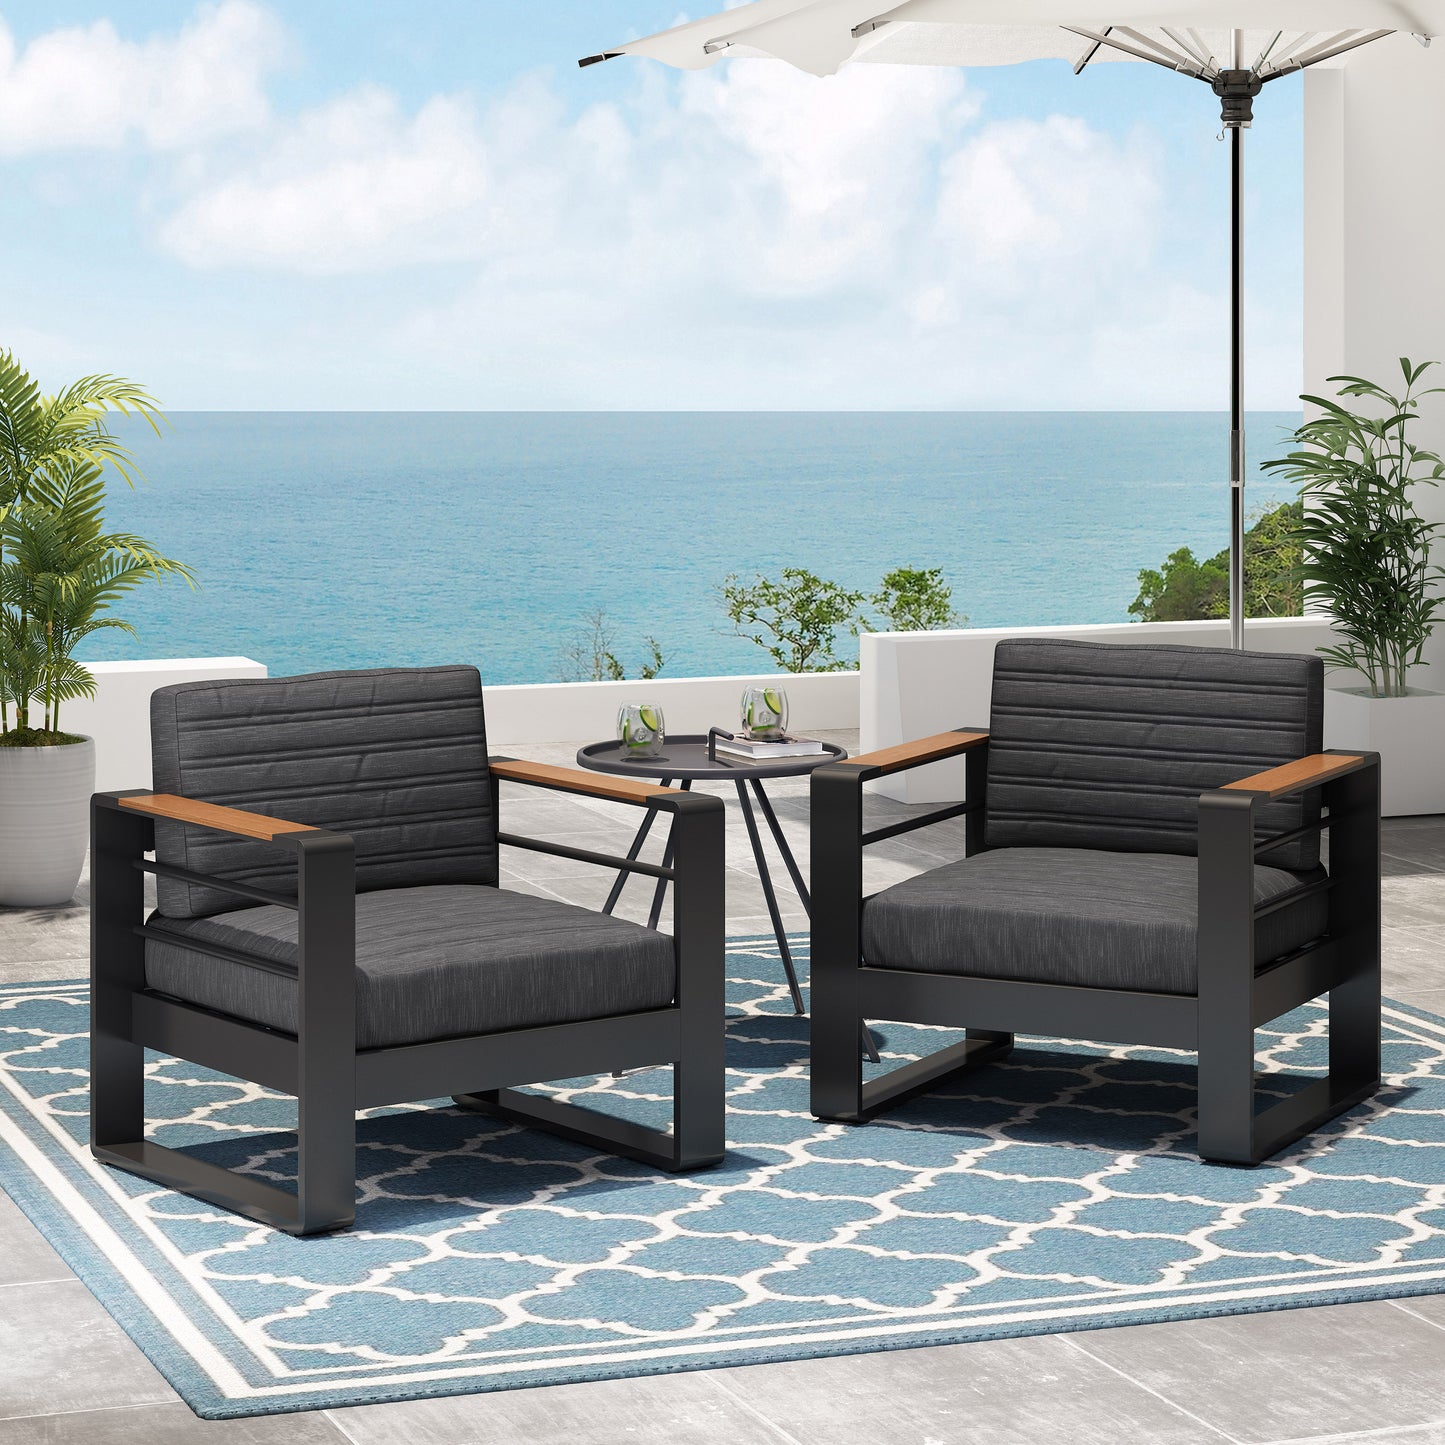 Swanton Outdoor Aluminum Club Chairs with Water Resistant Cushions, Set of 2, Dark Gray, Natural, and Black